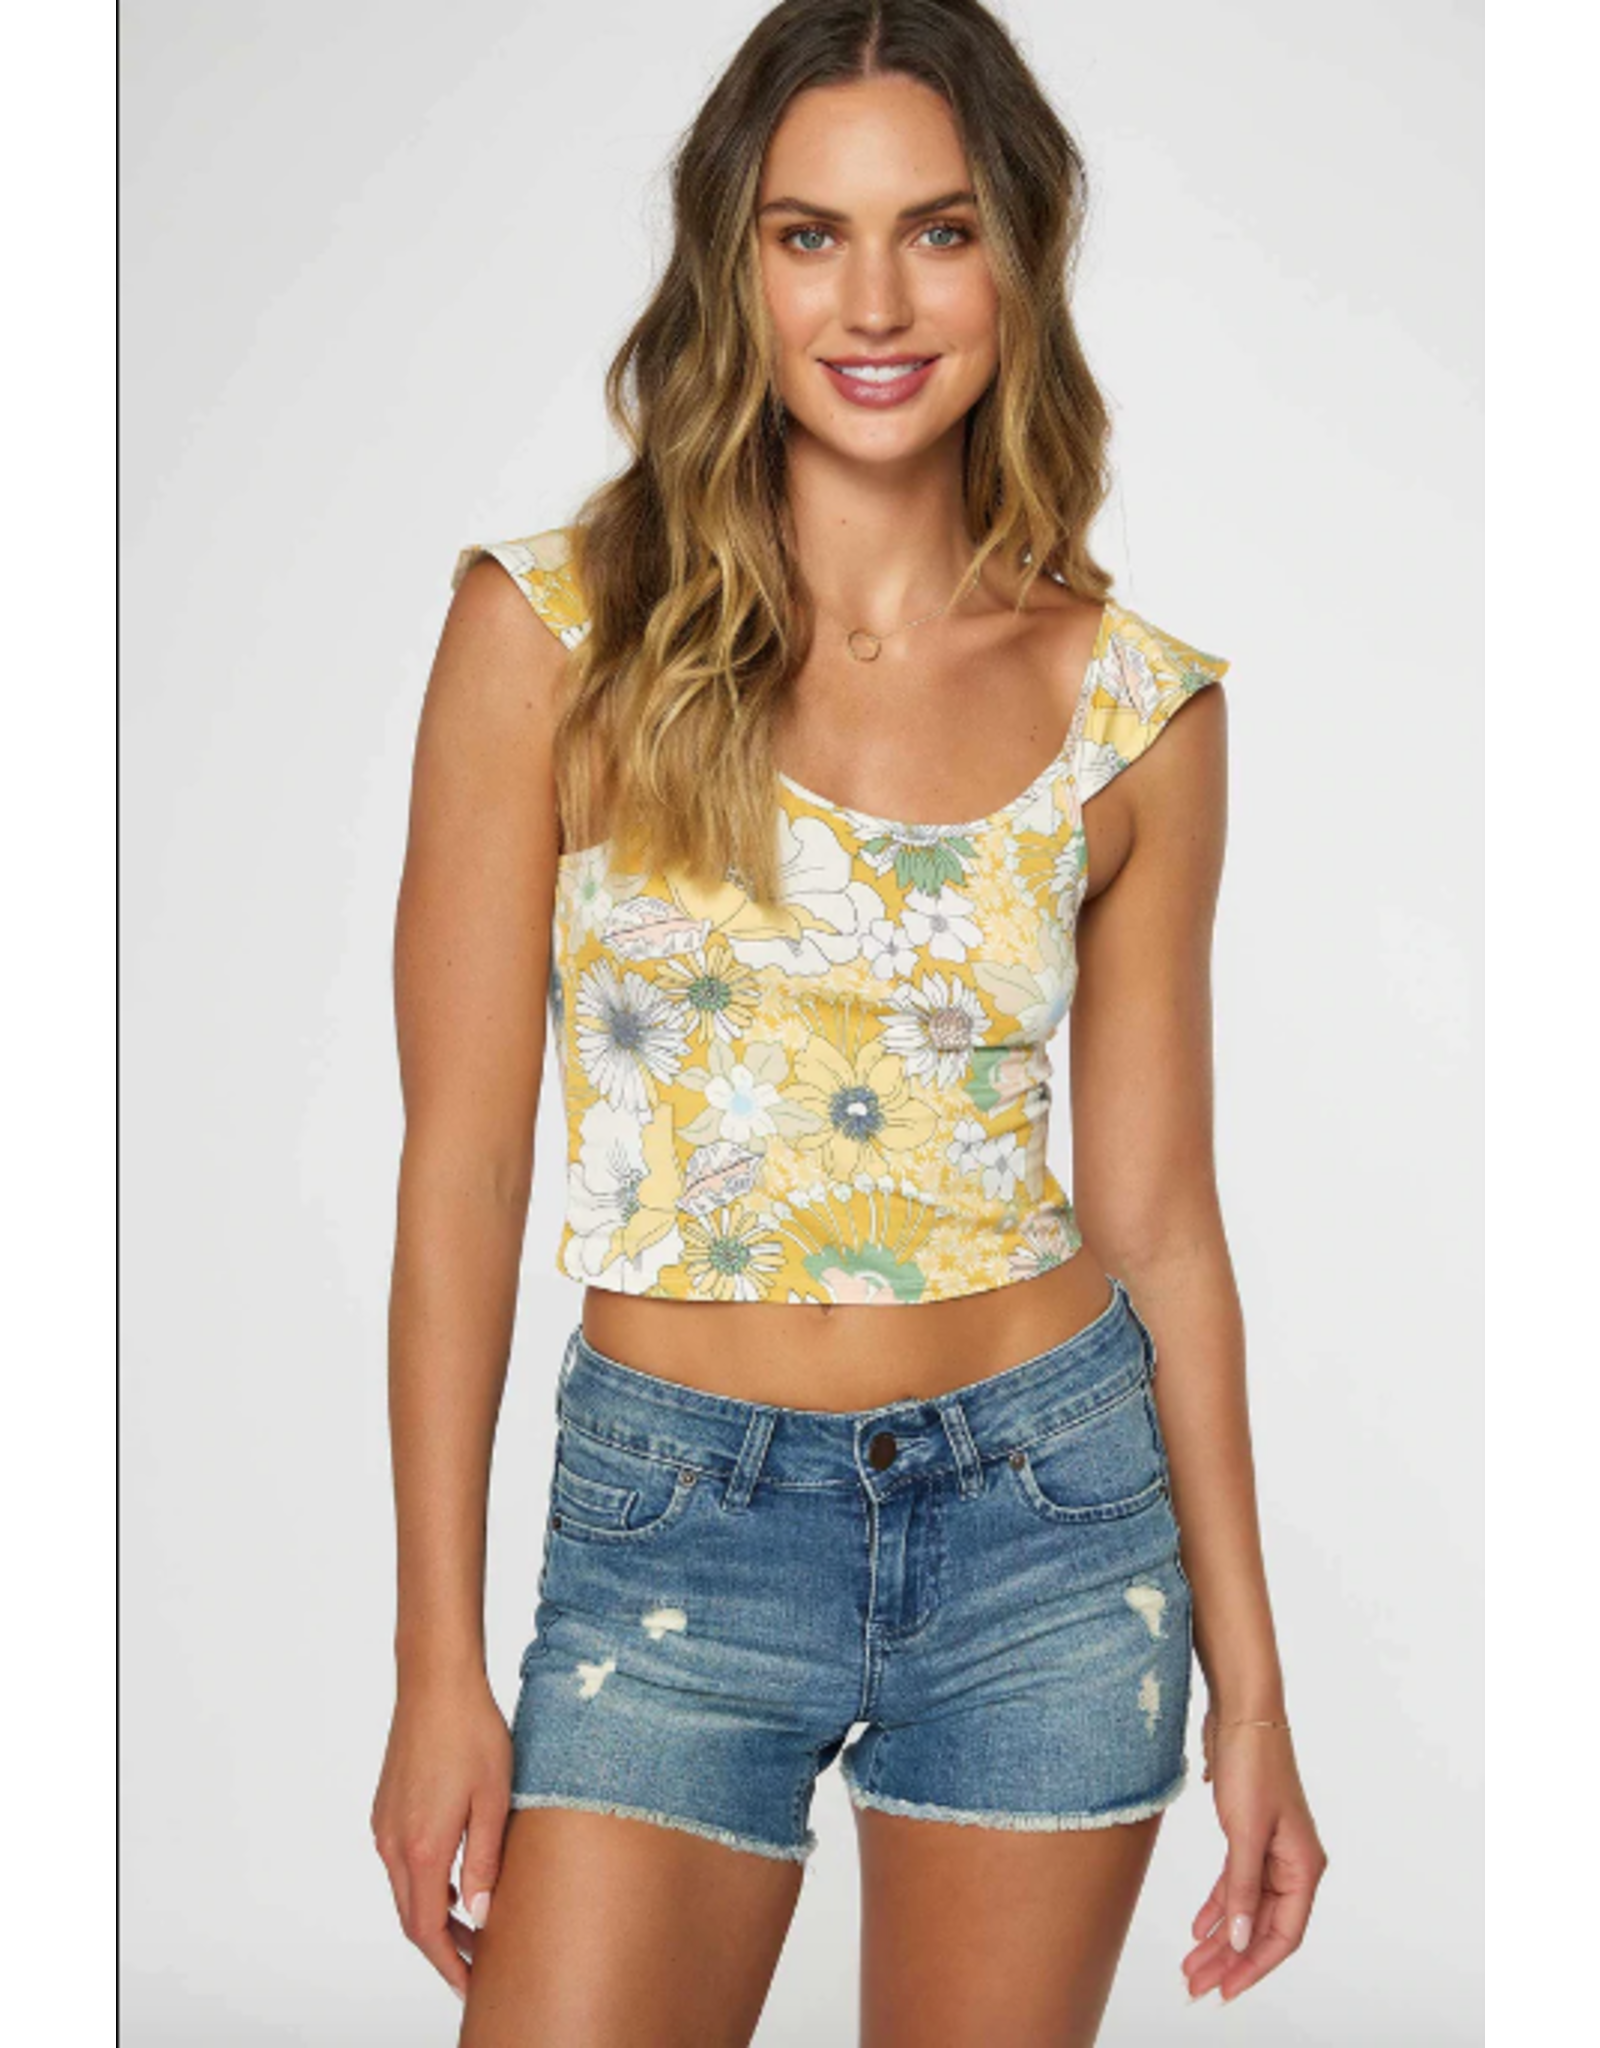 ONEILL O'NEILL ANDY FLORAL TOP